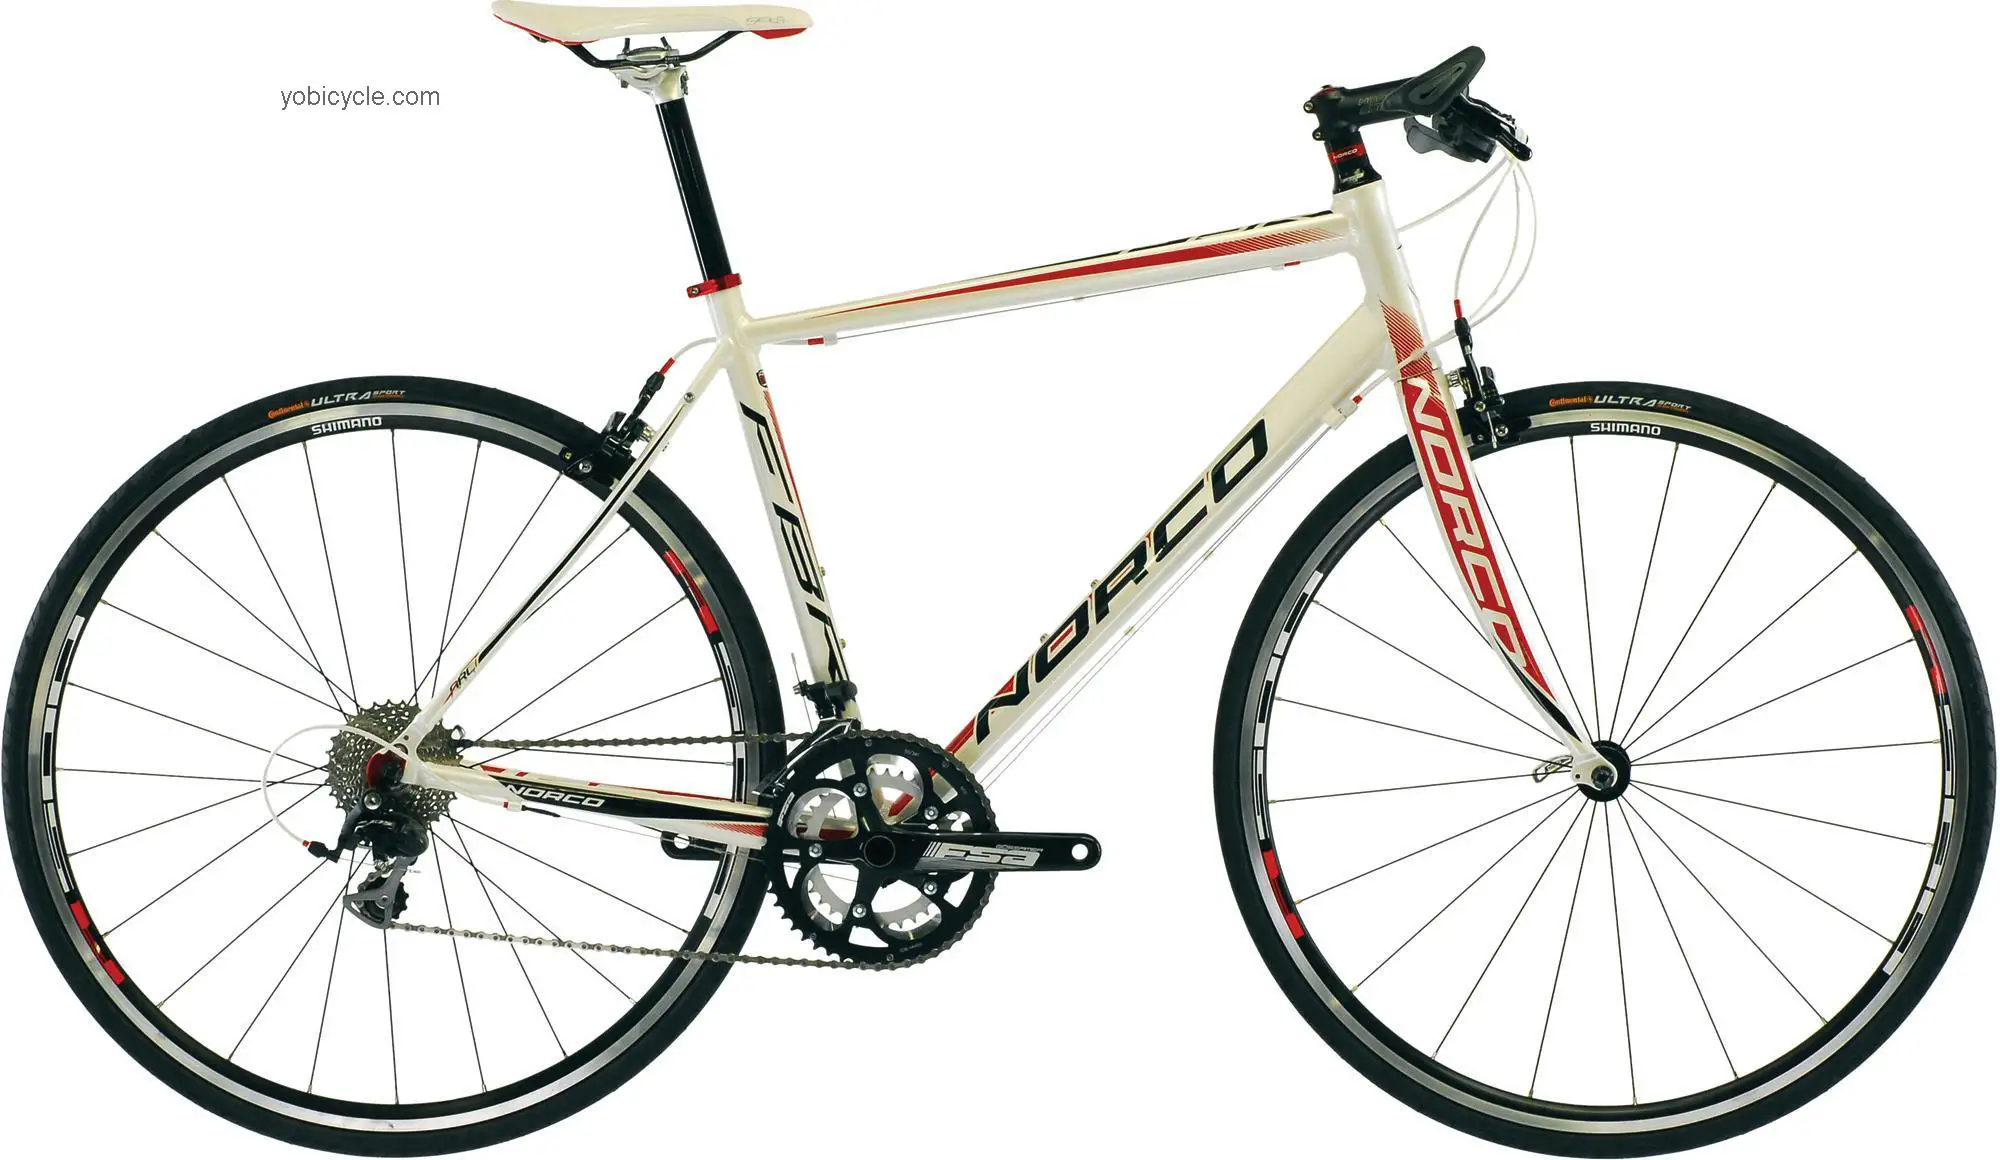 Norco FBR 1 2013 comparison online with competitors